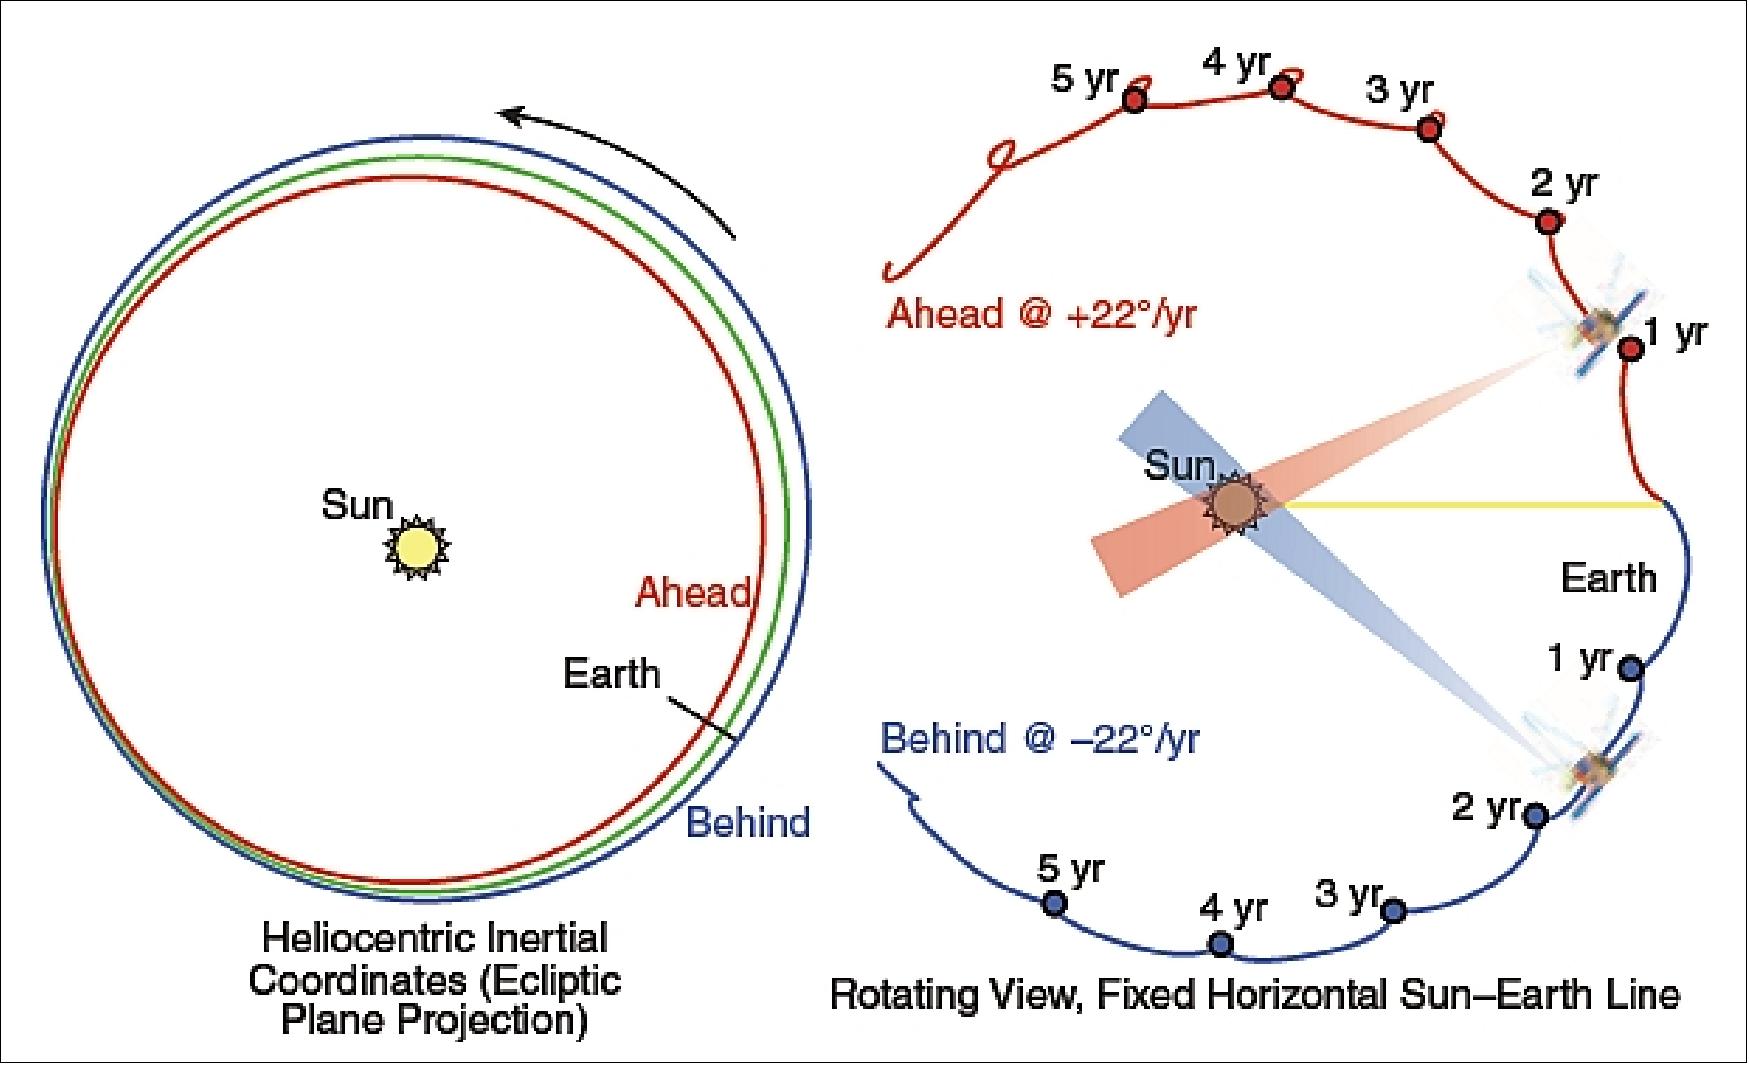 Figure 10: Orbital progression of the STEREO spacecraft over the mission life (image credit: JHU/APL, NASA)